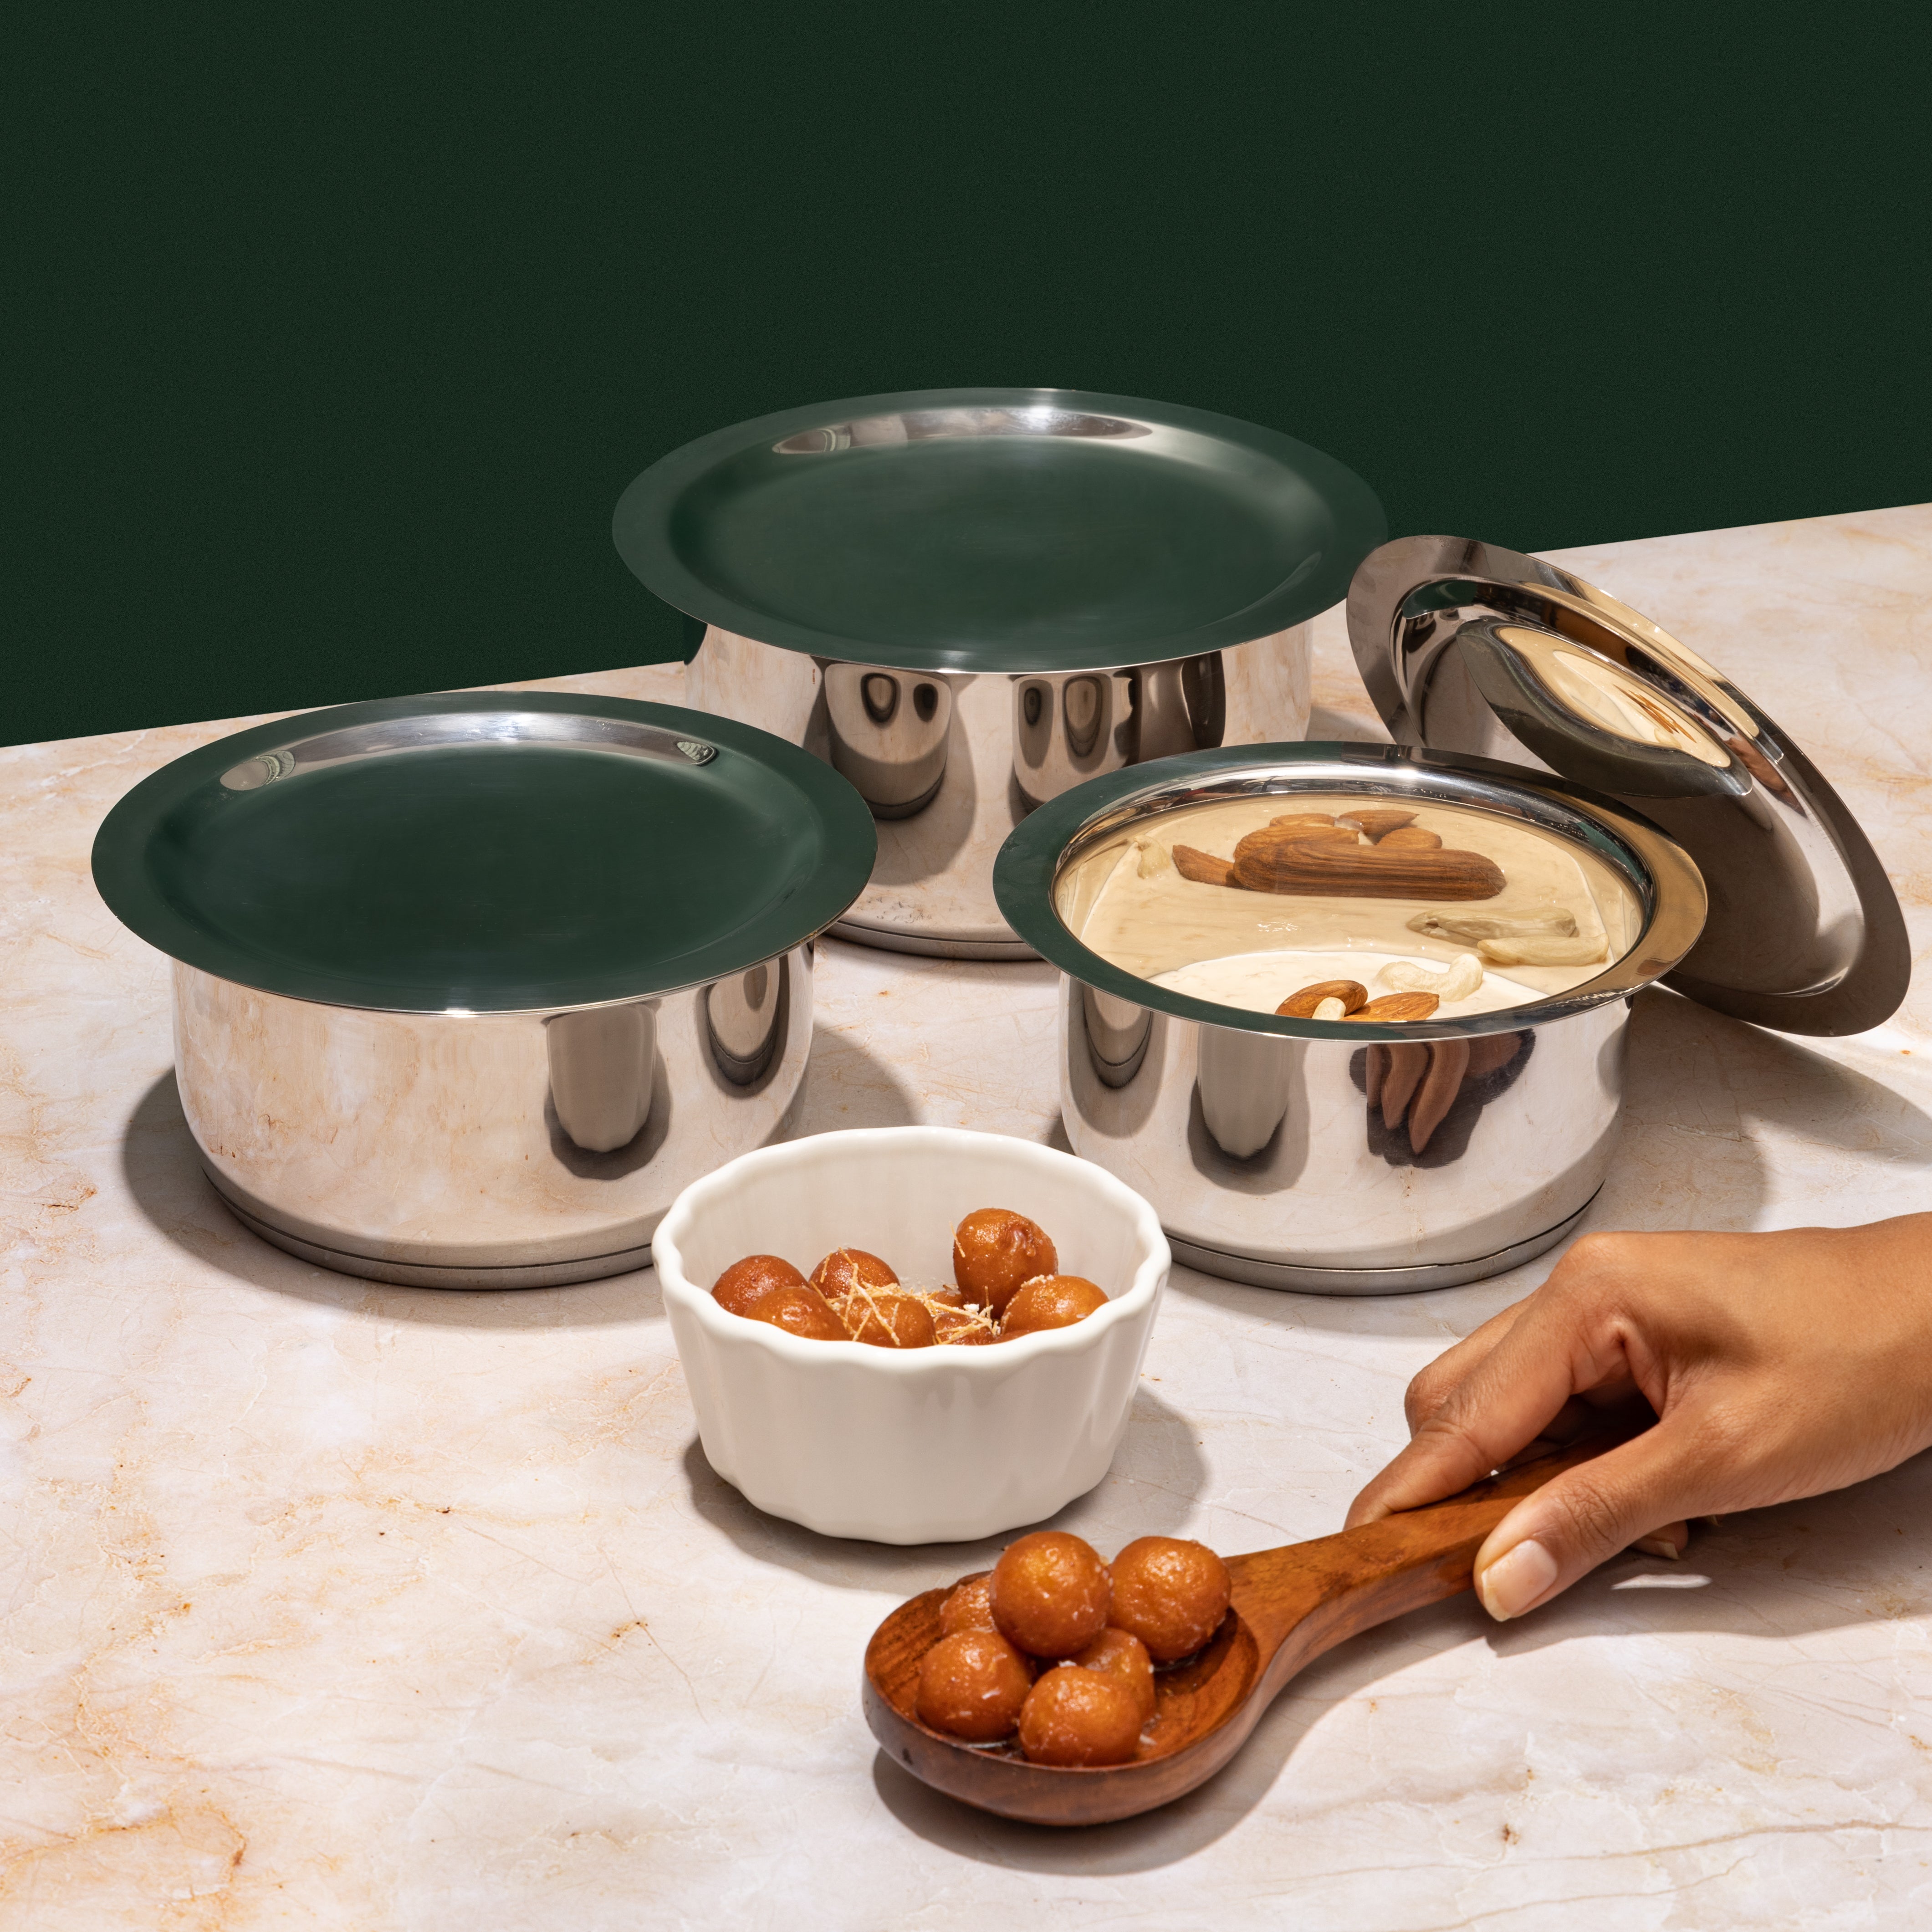 Vinod Stainless Steel 3 pc Tope Set with Lid (Induction Friendly)